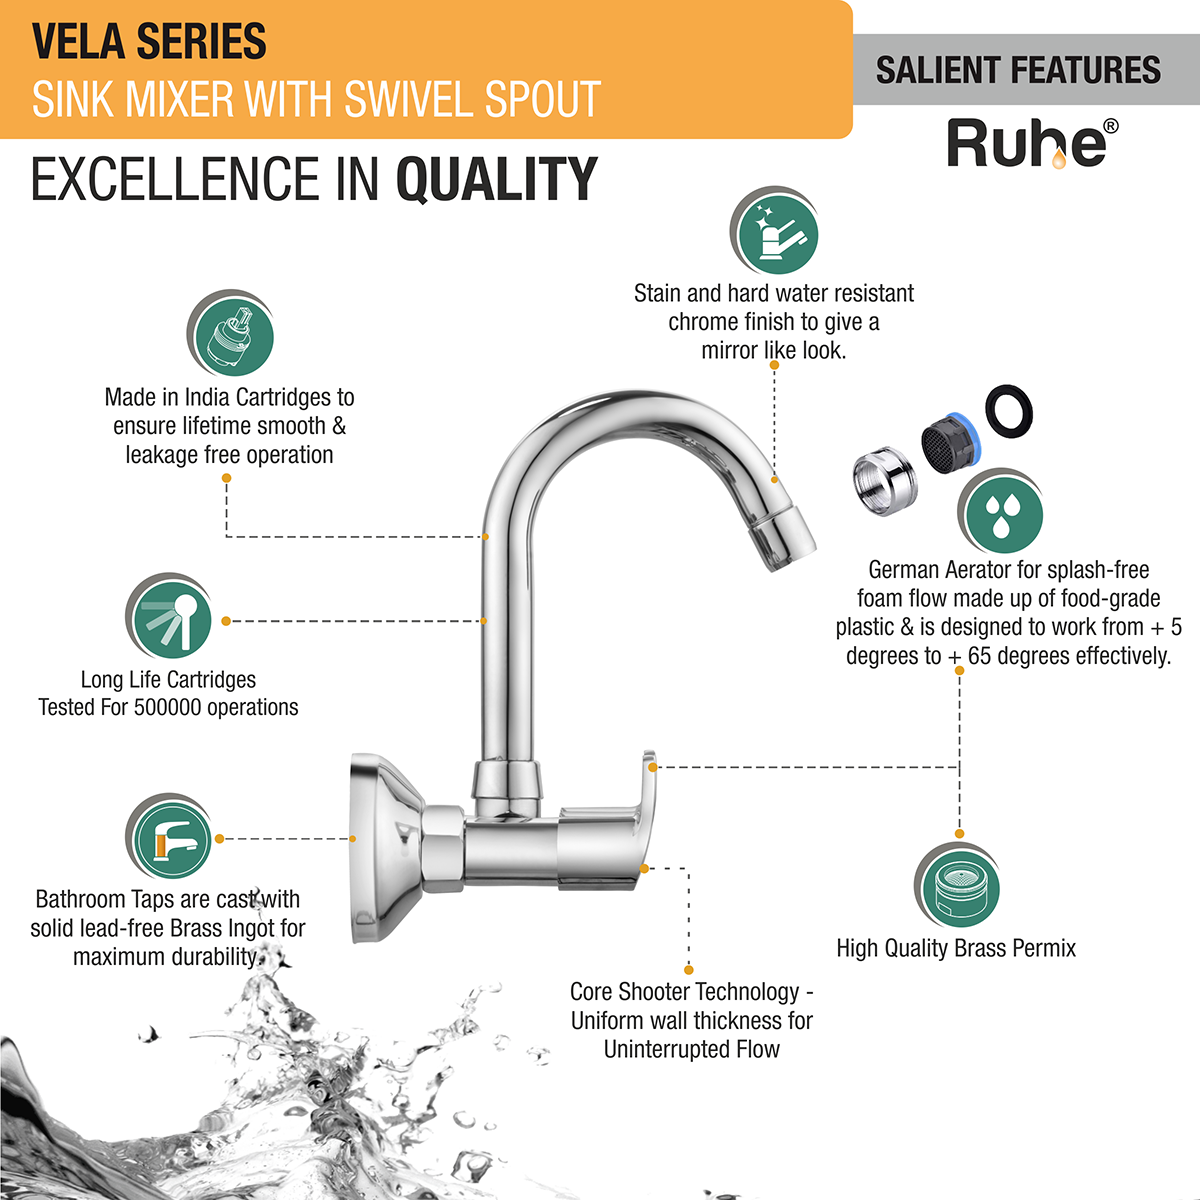 Vela Sink Mixer with Small (7 inches) Round Swivel Spout Faucet features